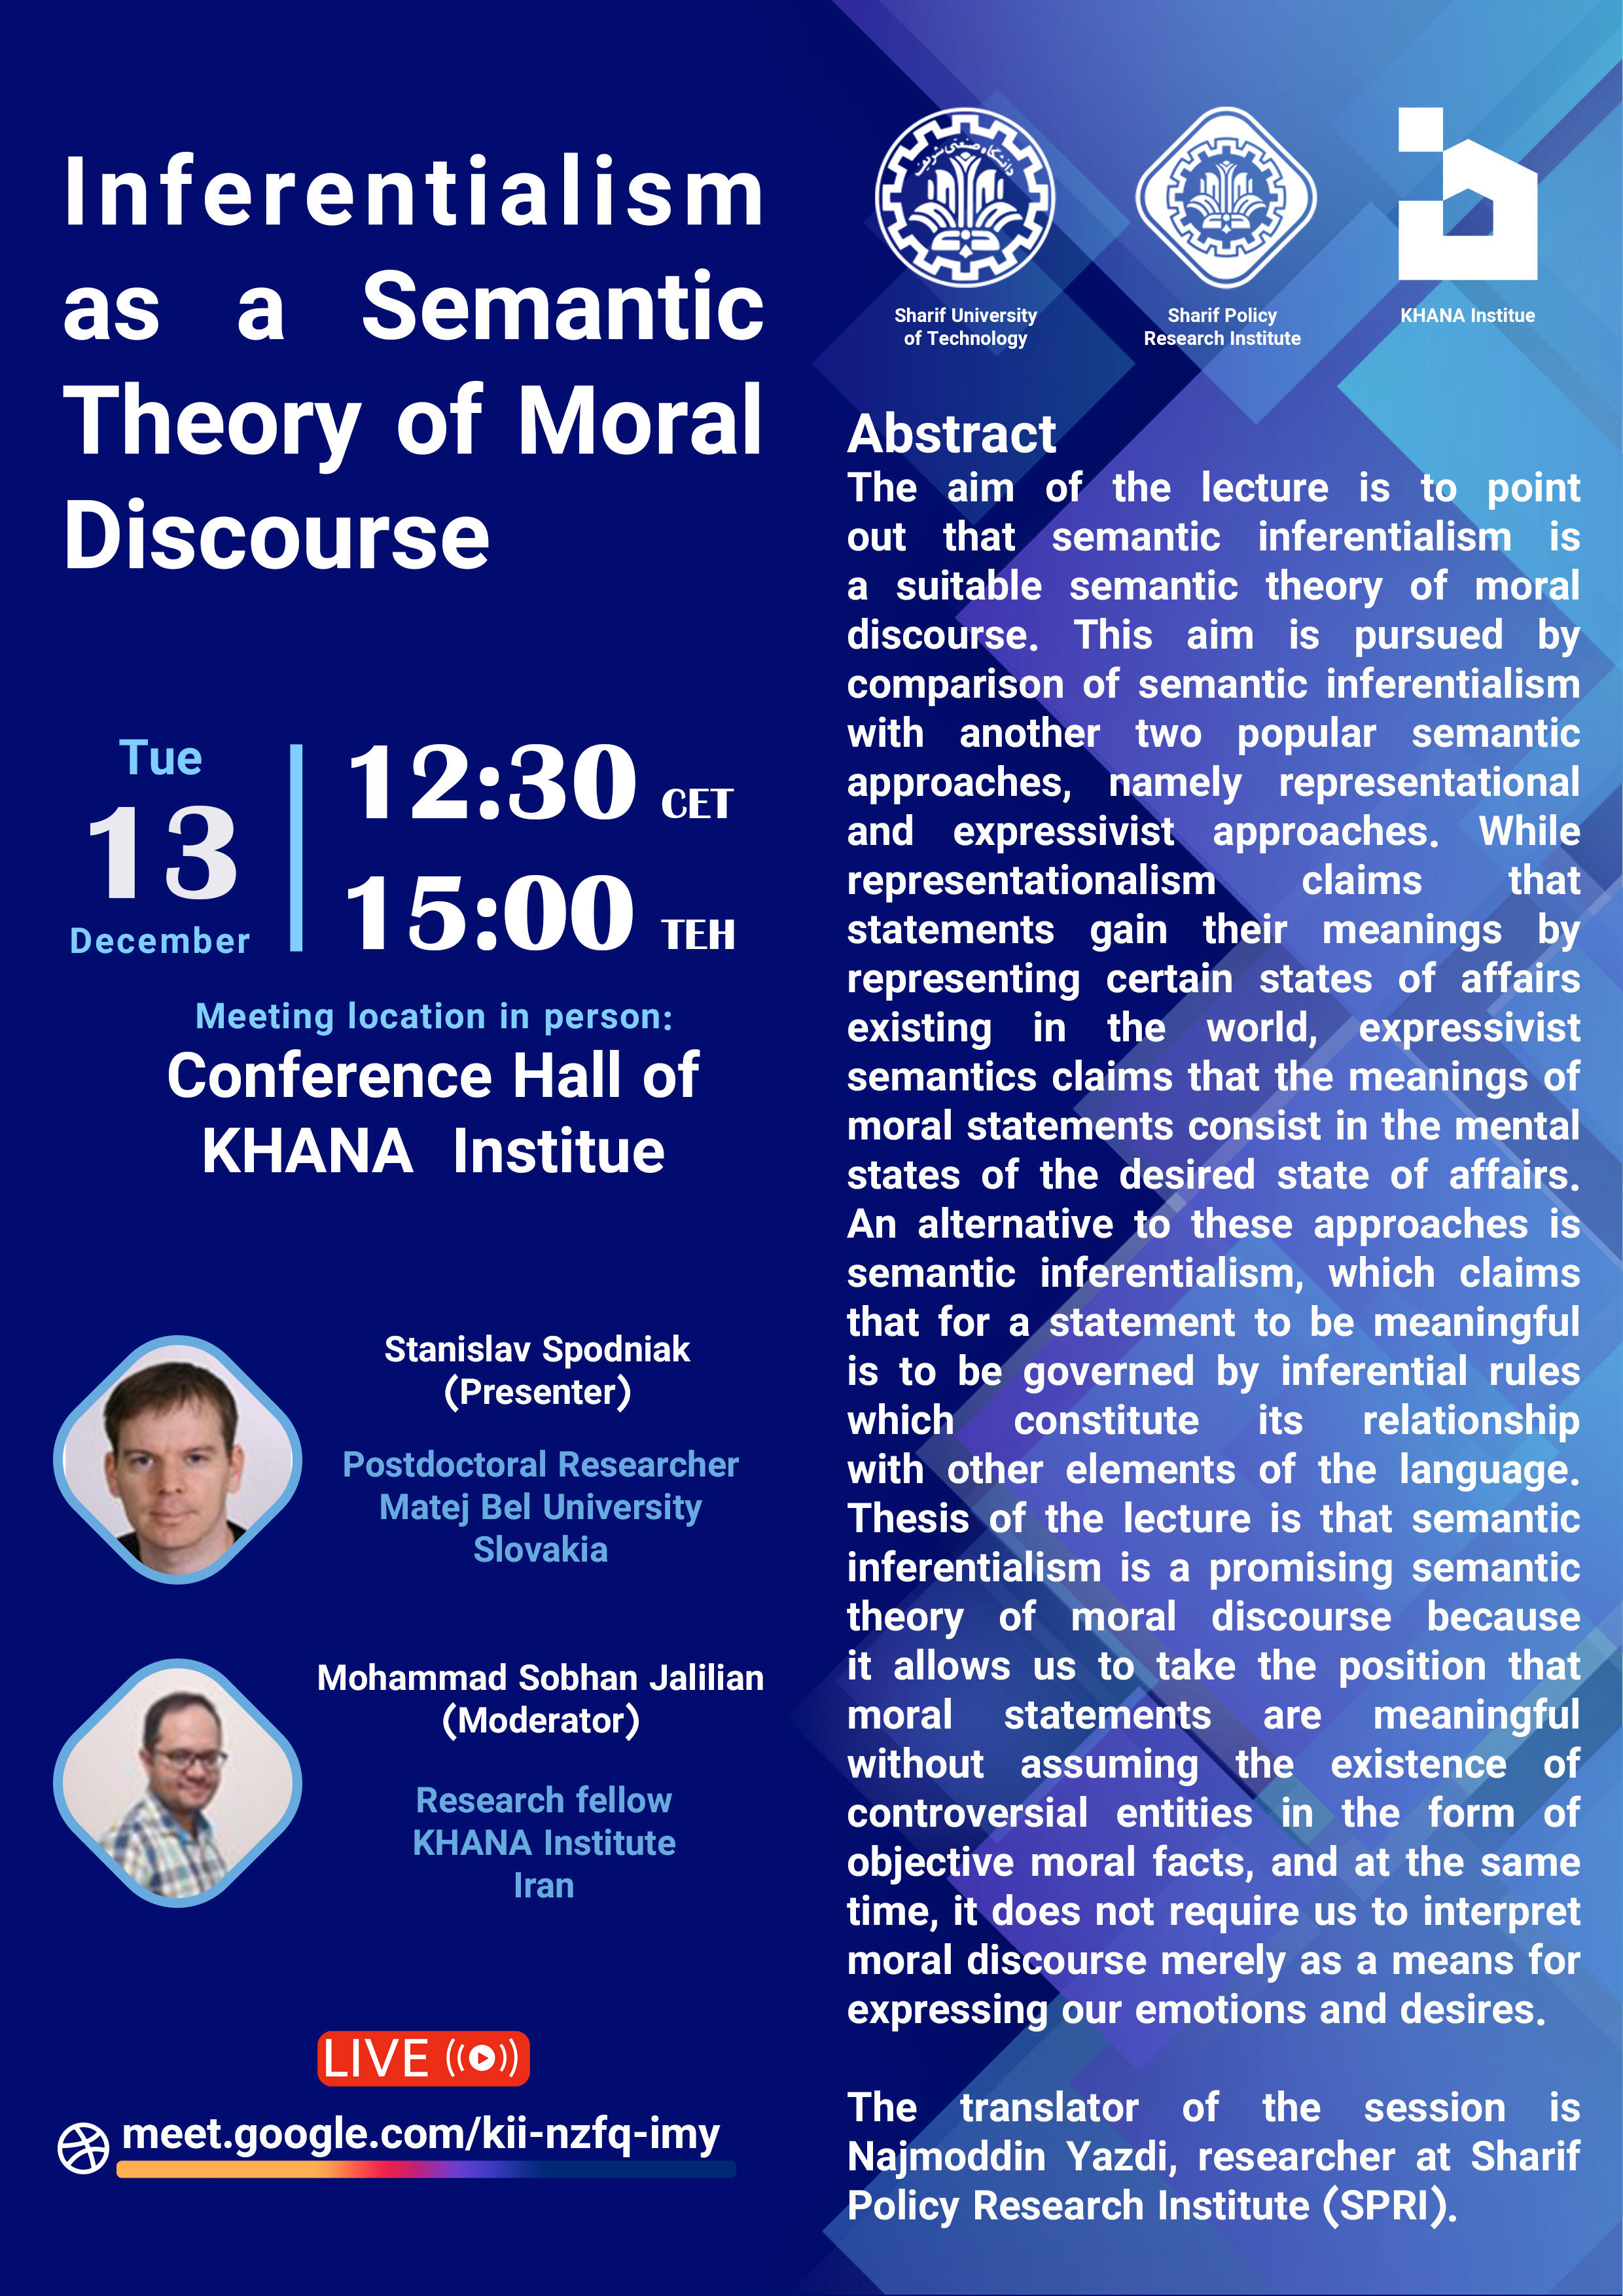 Inferentialism as a Semantic theory of Moral Discourse